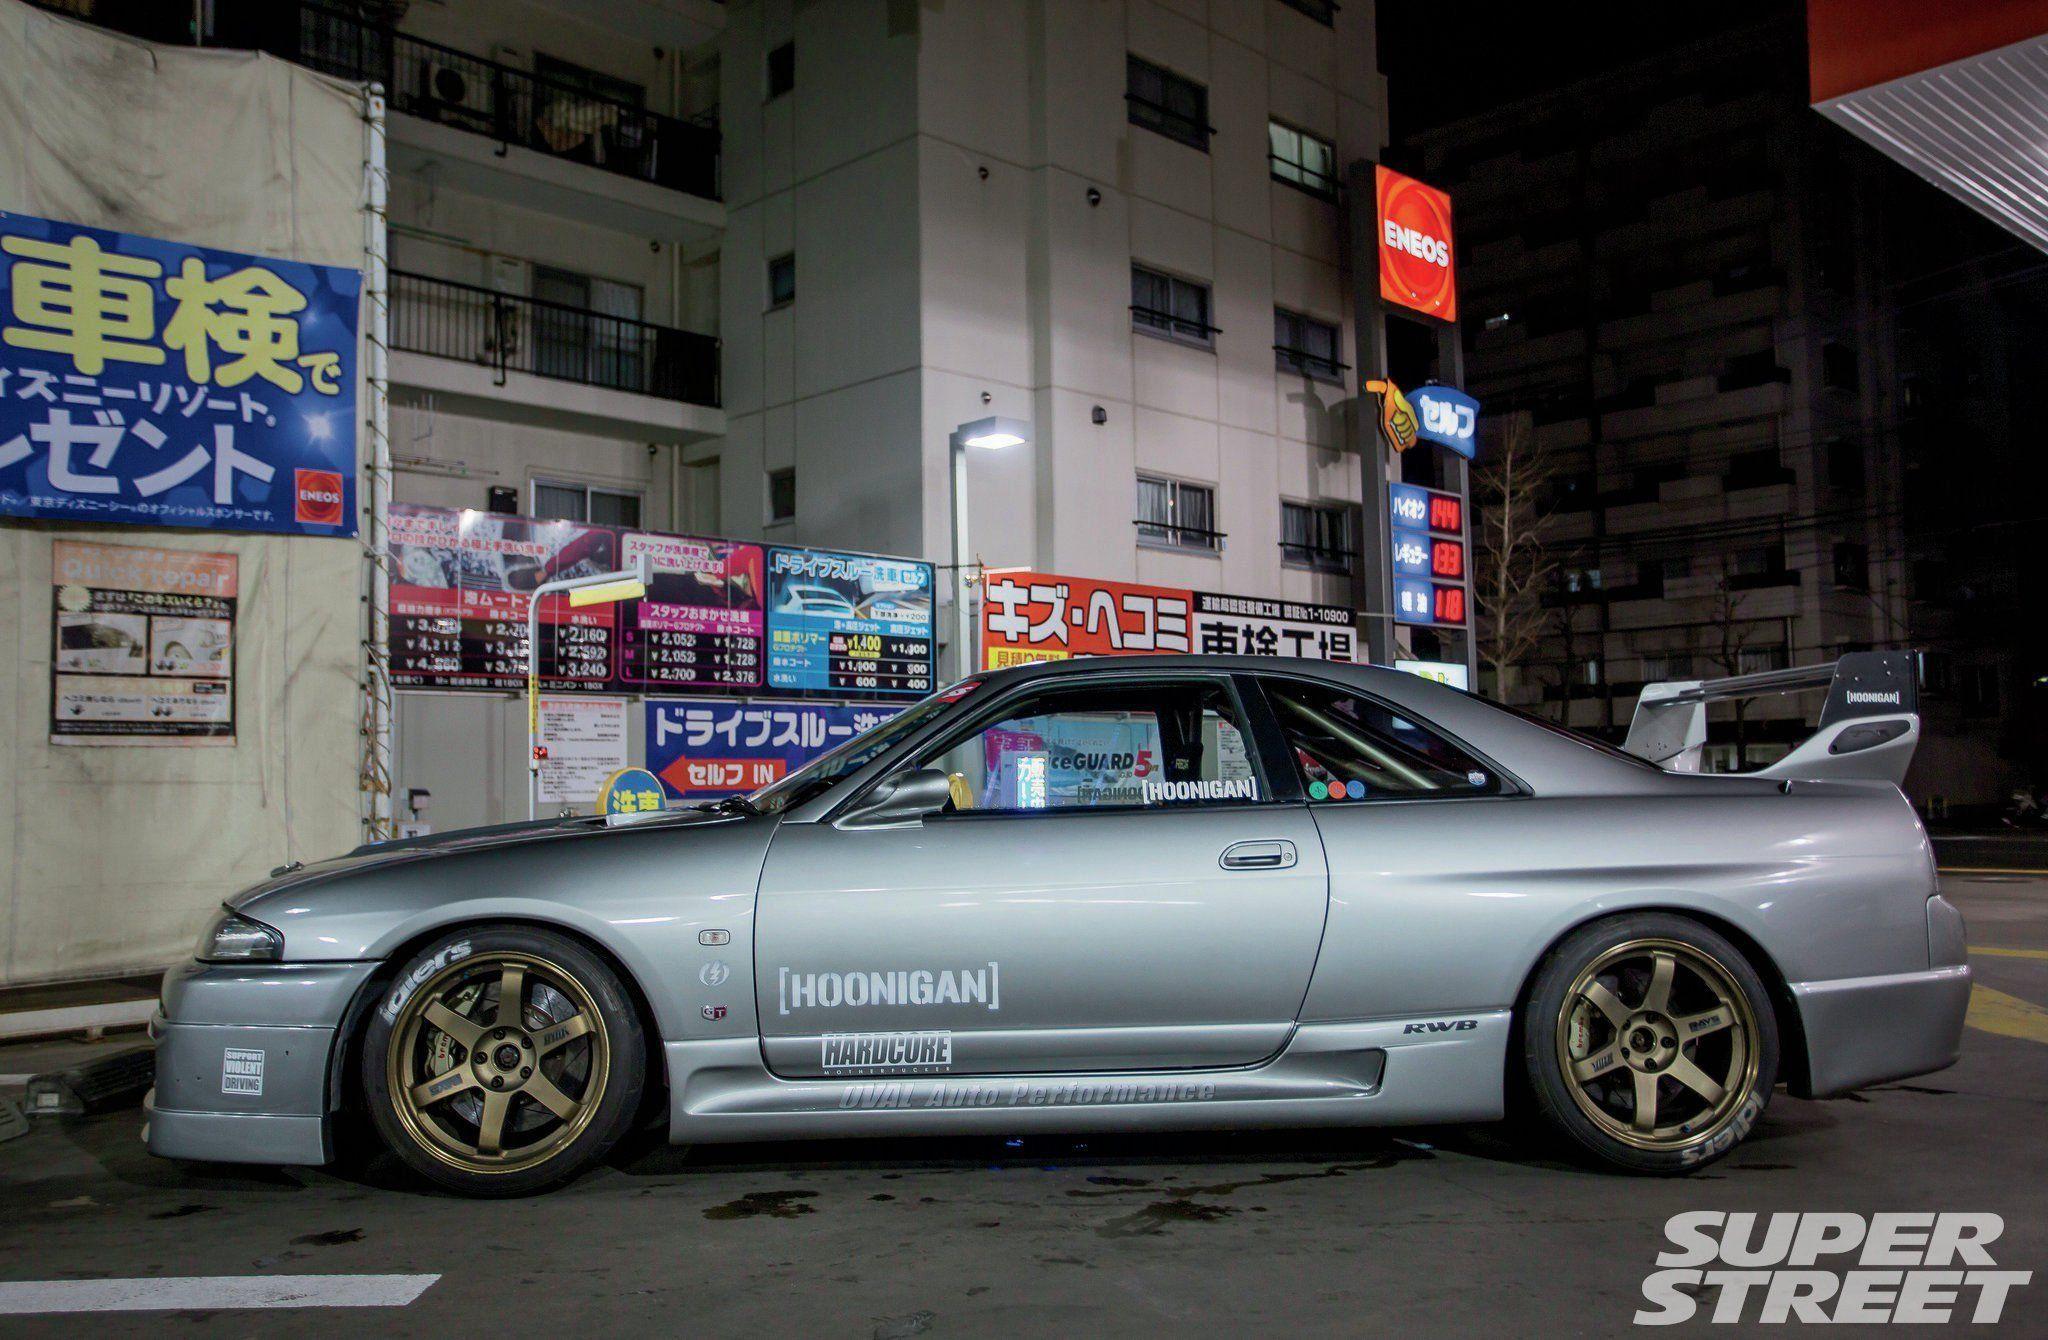 R33 Nissan Skyline coupe cars modified wallpaperx1340